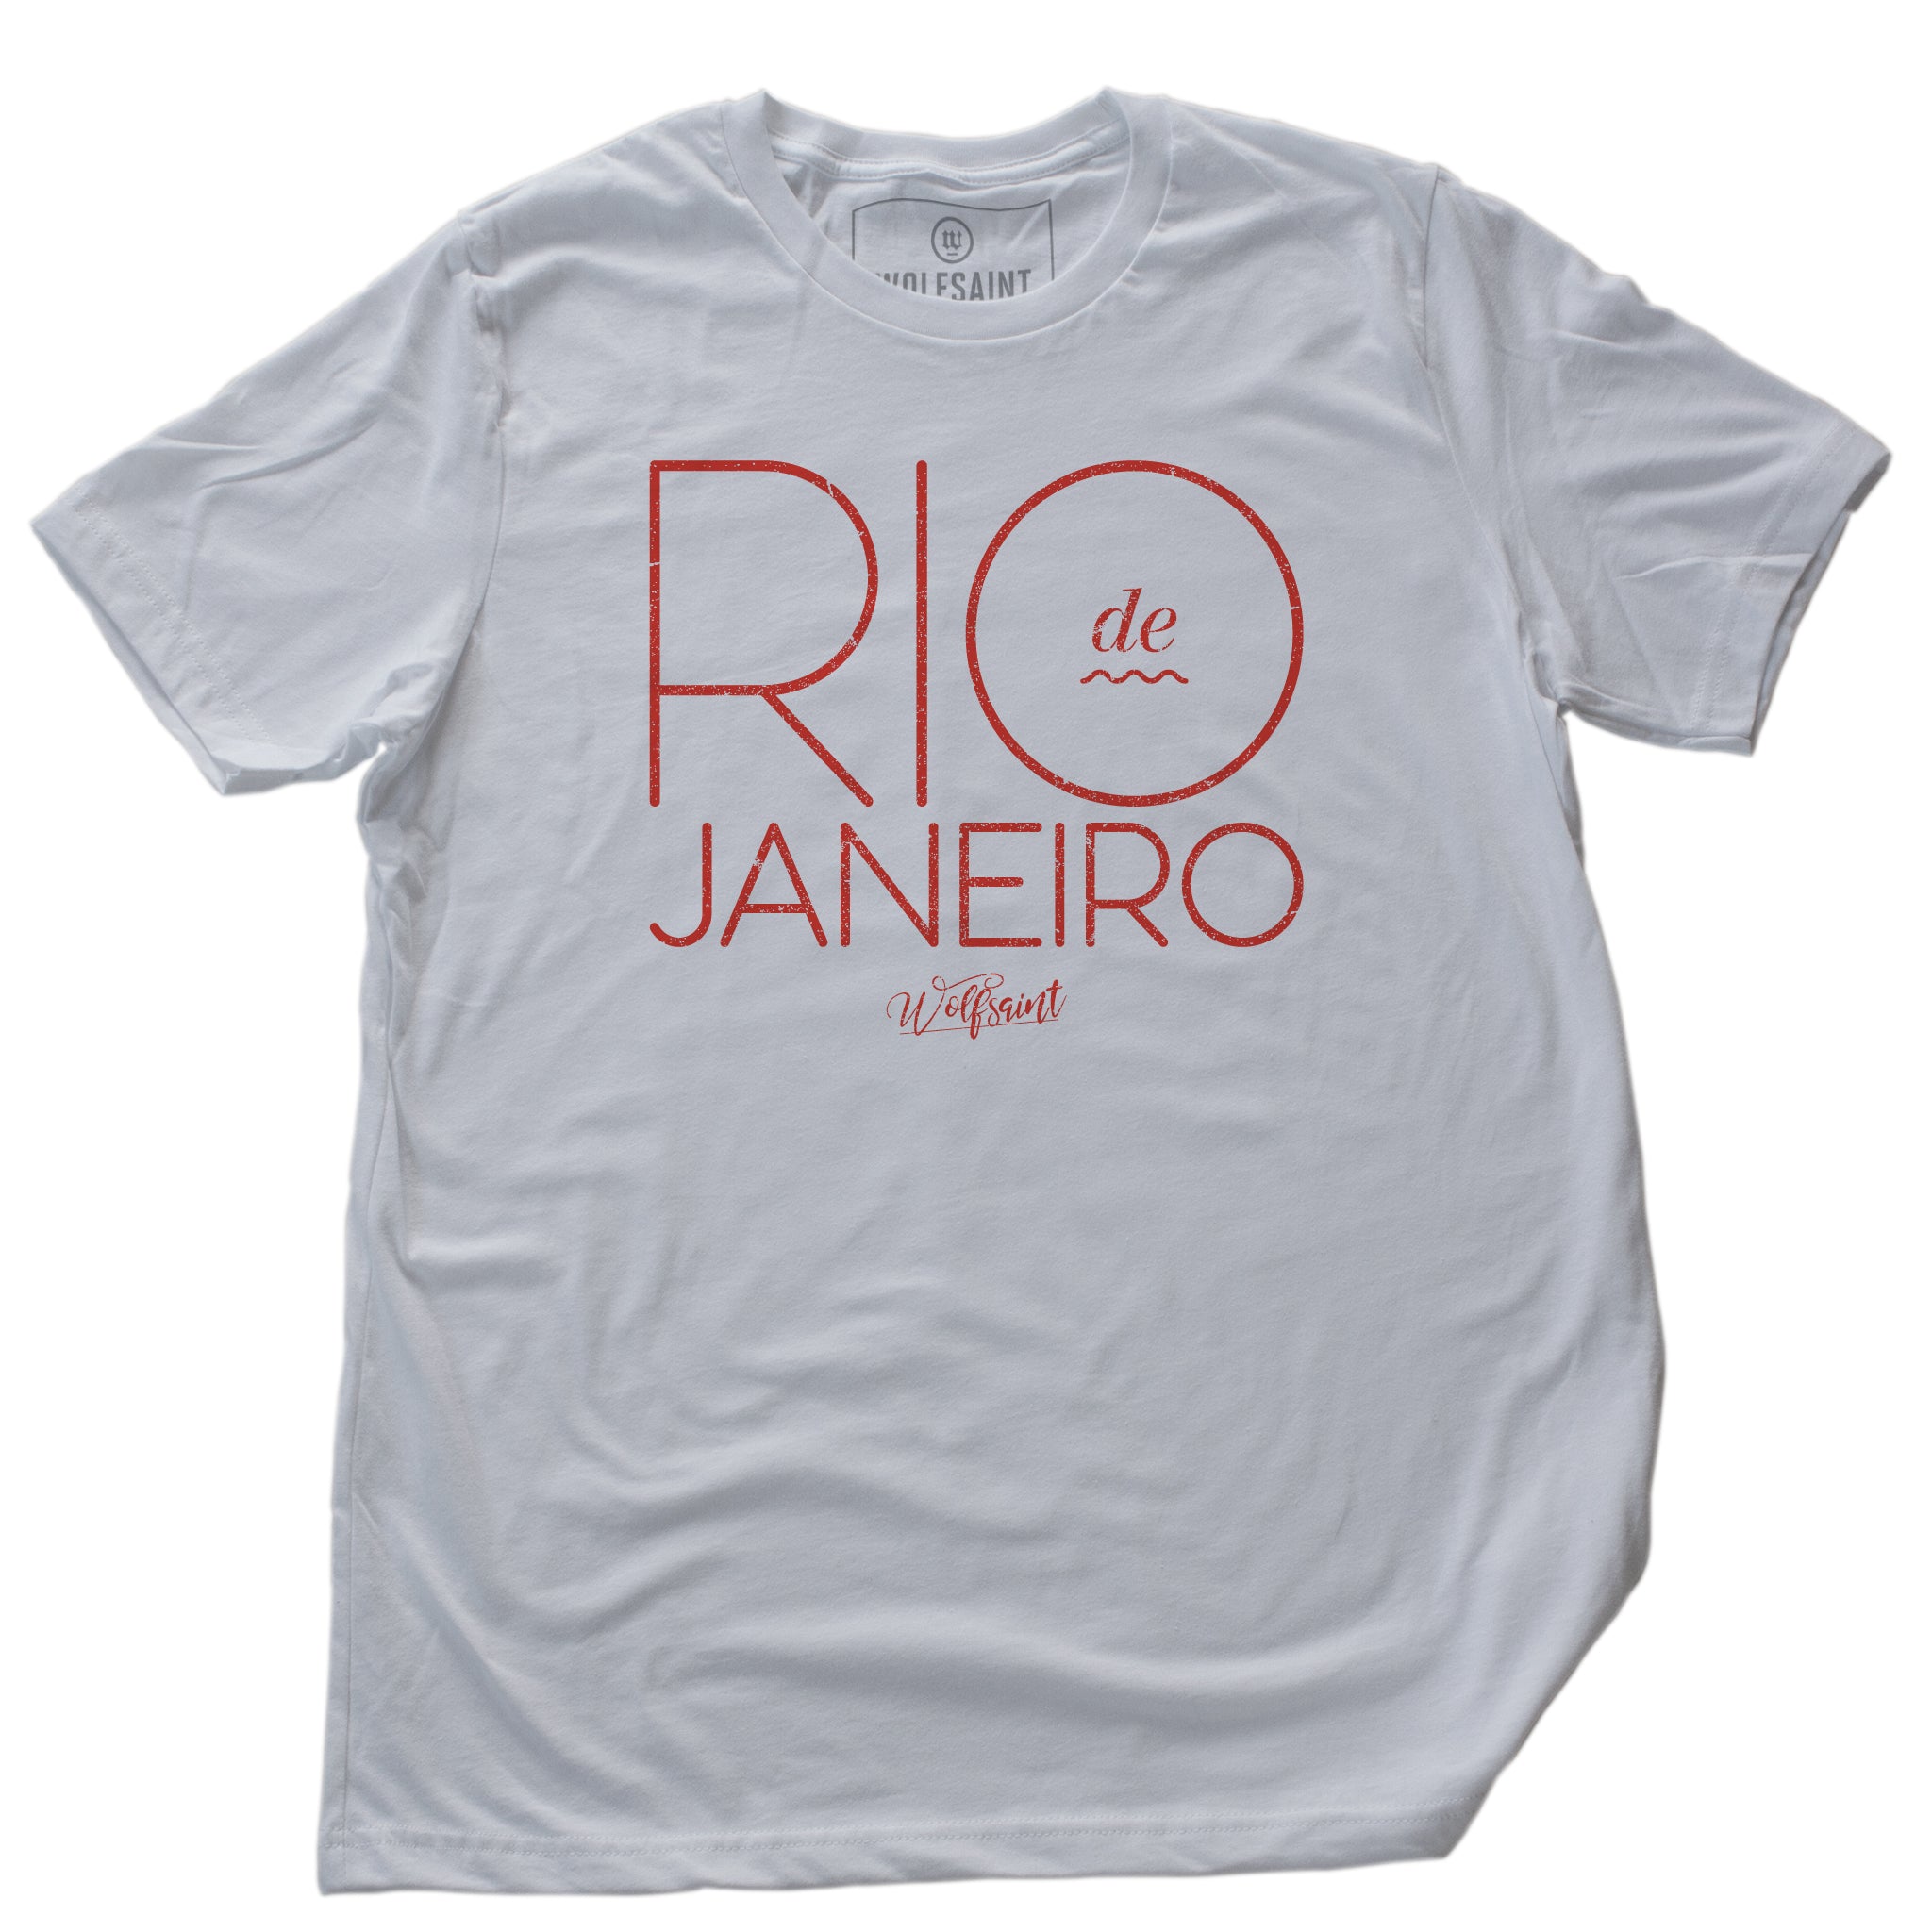 An elegant, retro design fashion t-shirt with RIO DE JANEIRO in large orange typography in a thin font on White cotton. The Wolfsaint script logo is below. From Wolfsaint.net 